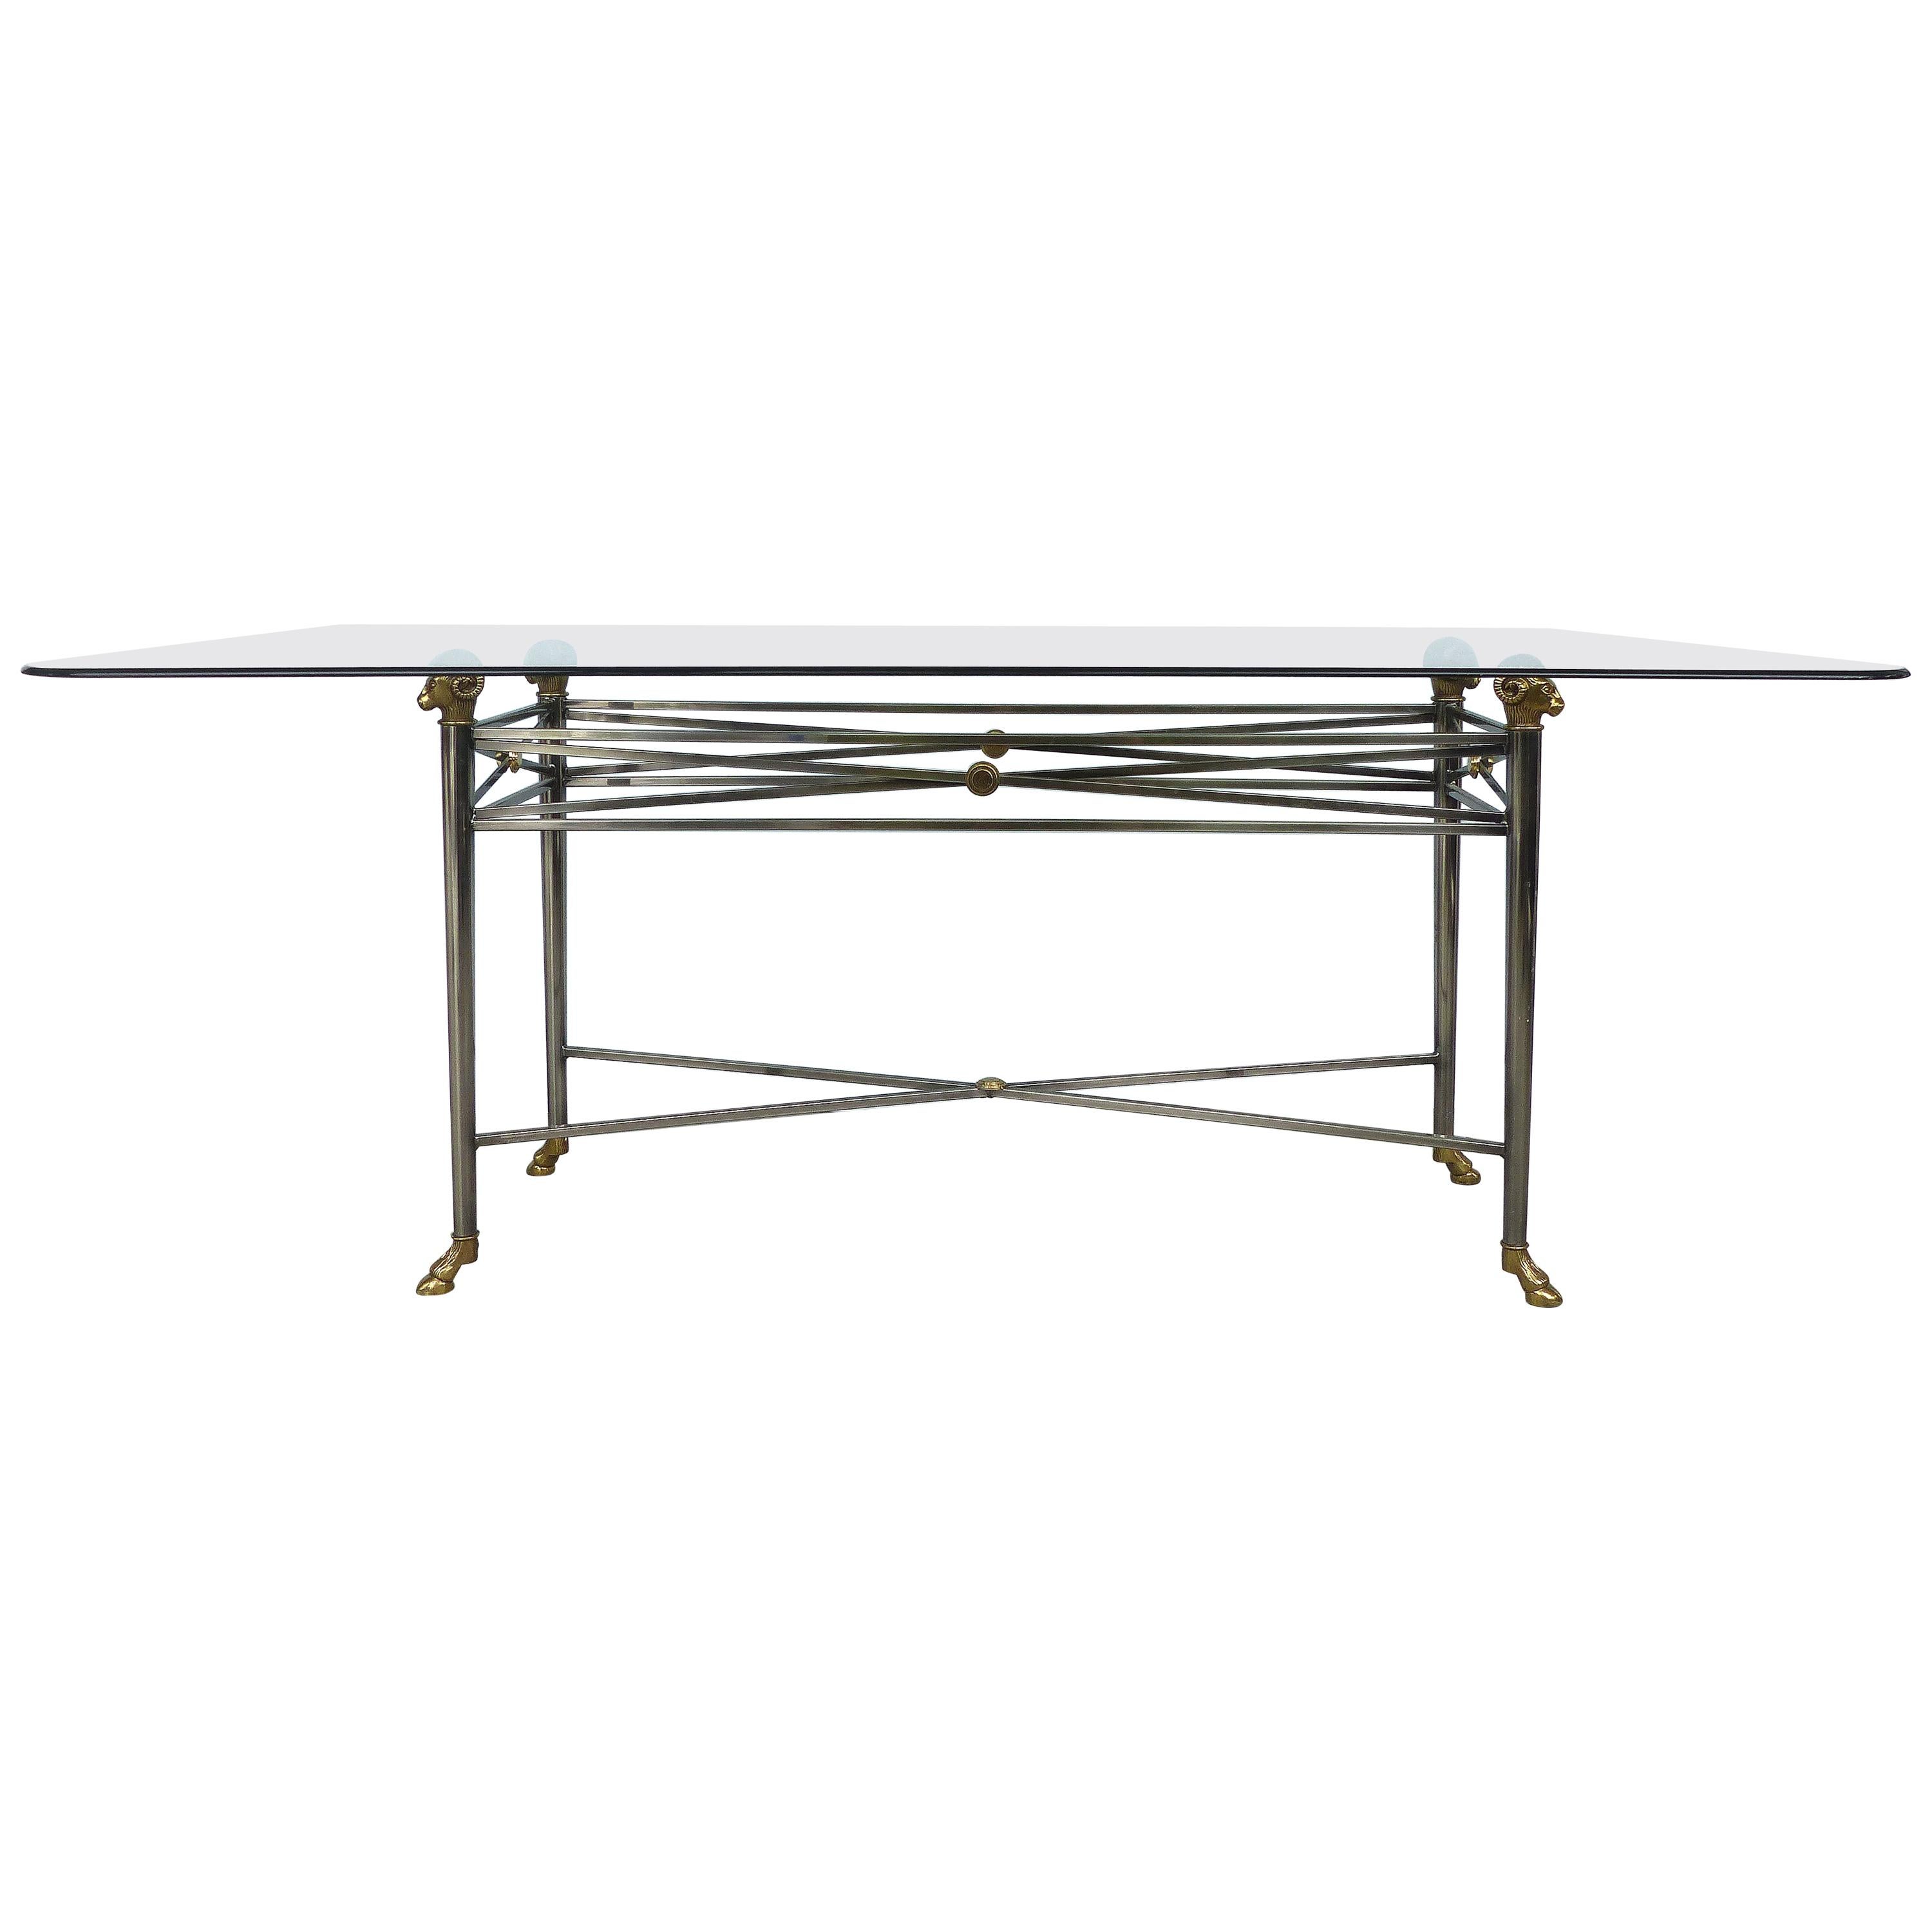 Italianate DIA Steel and Brass Dining Table with Ram's Heads and Hoof Feet